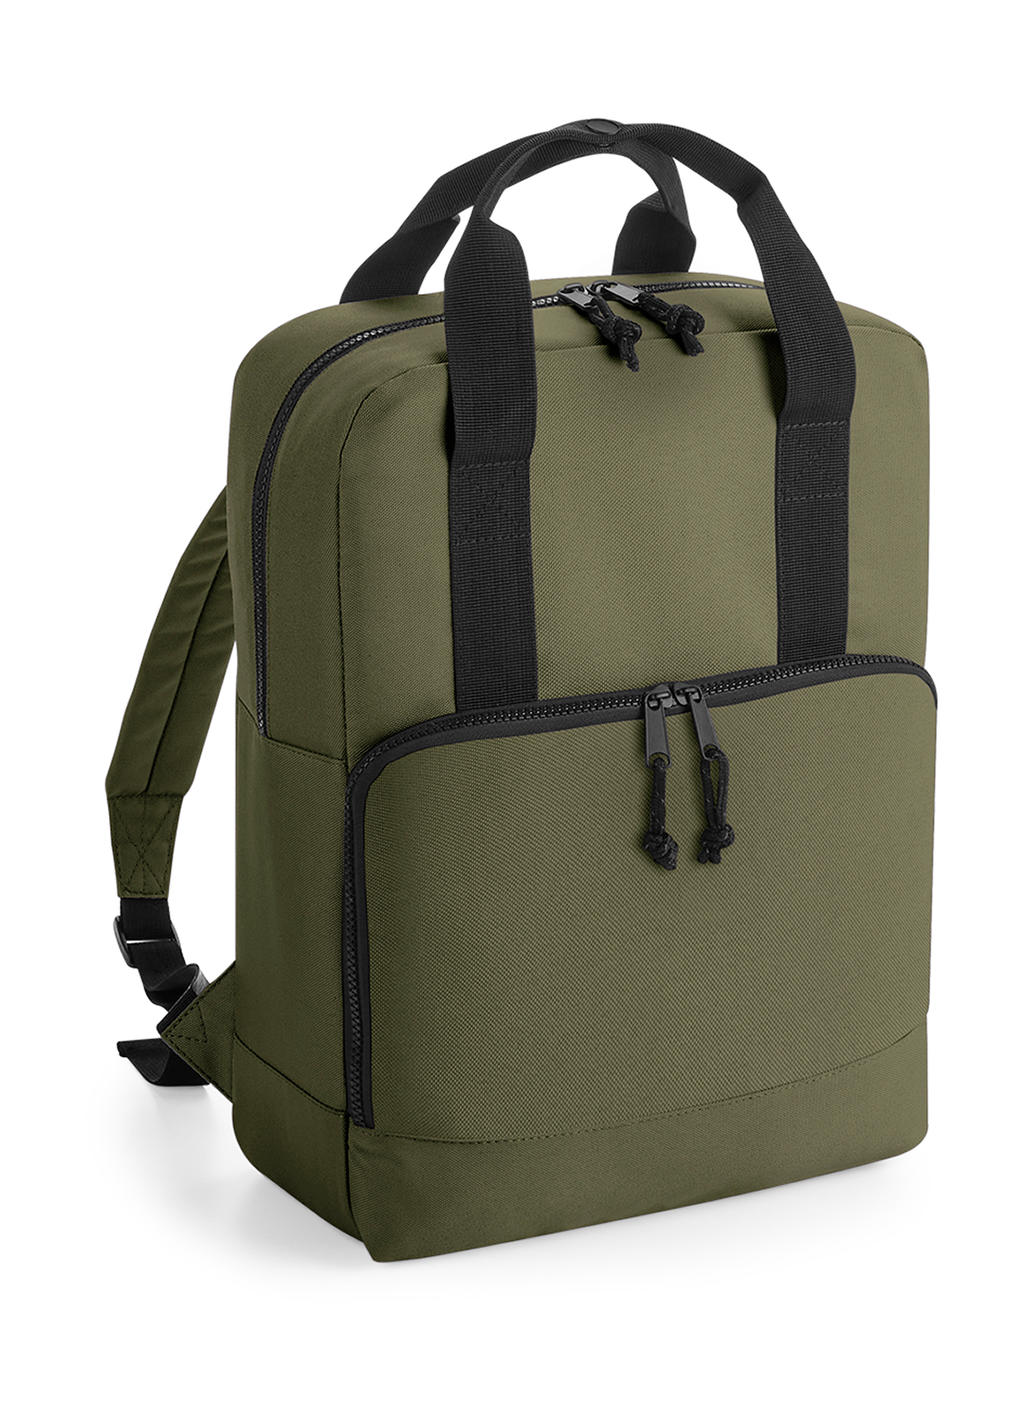  Recycled Twin Handle Cooler Backpack in Farbe Military Green